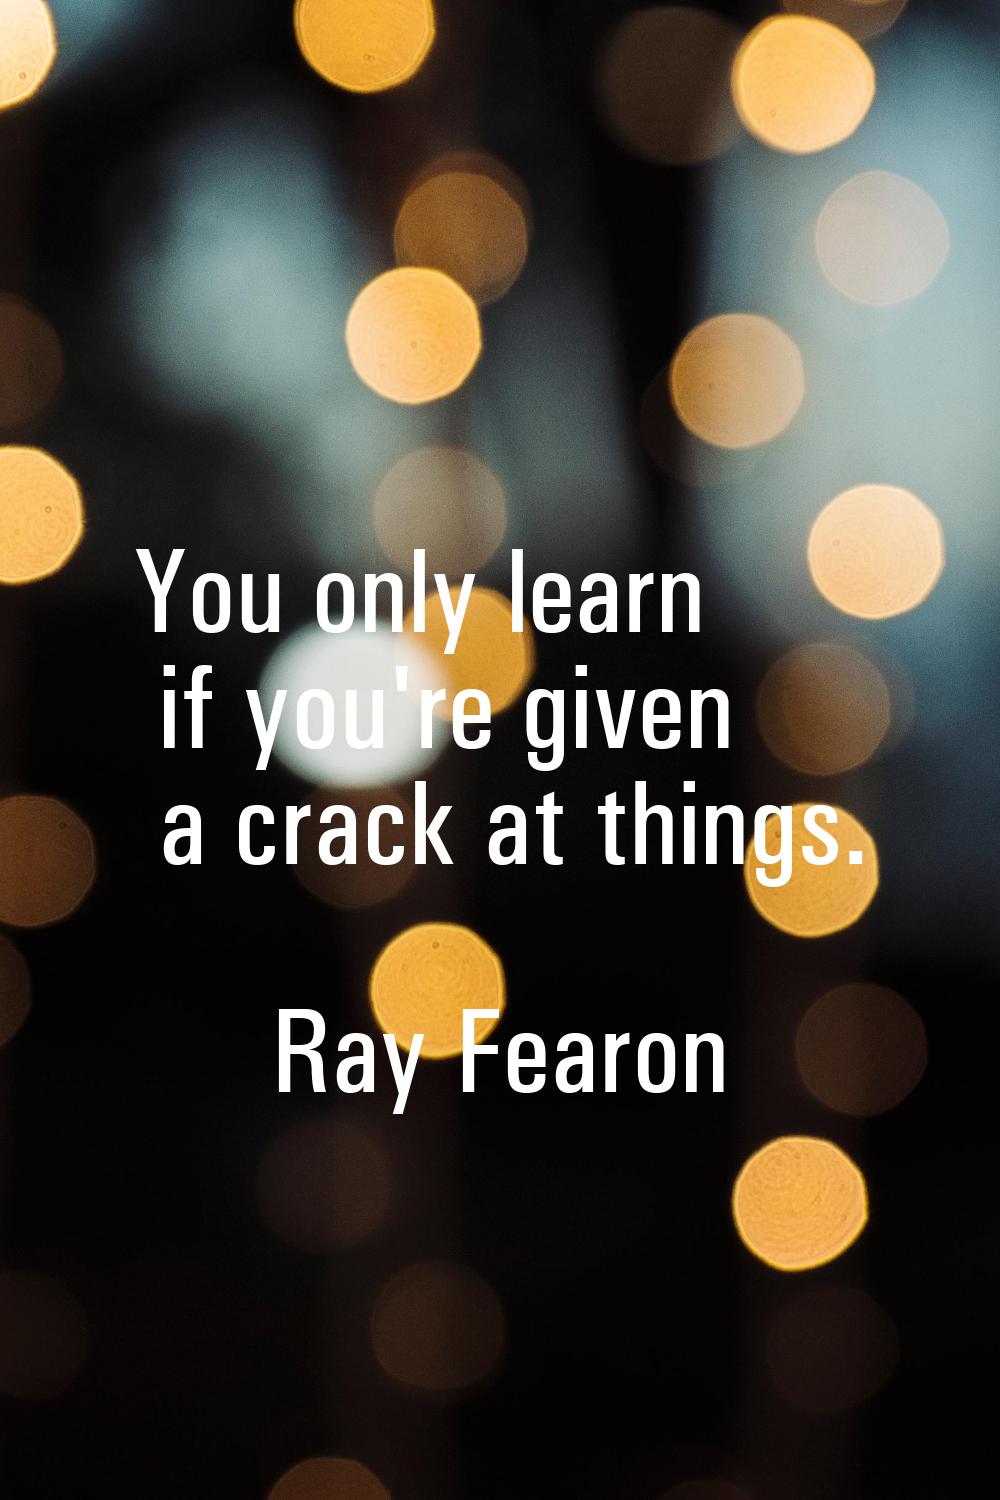 You only learn if you're given a crack at things.